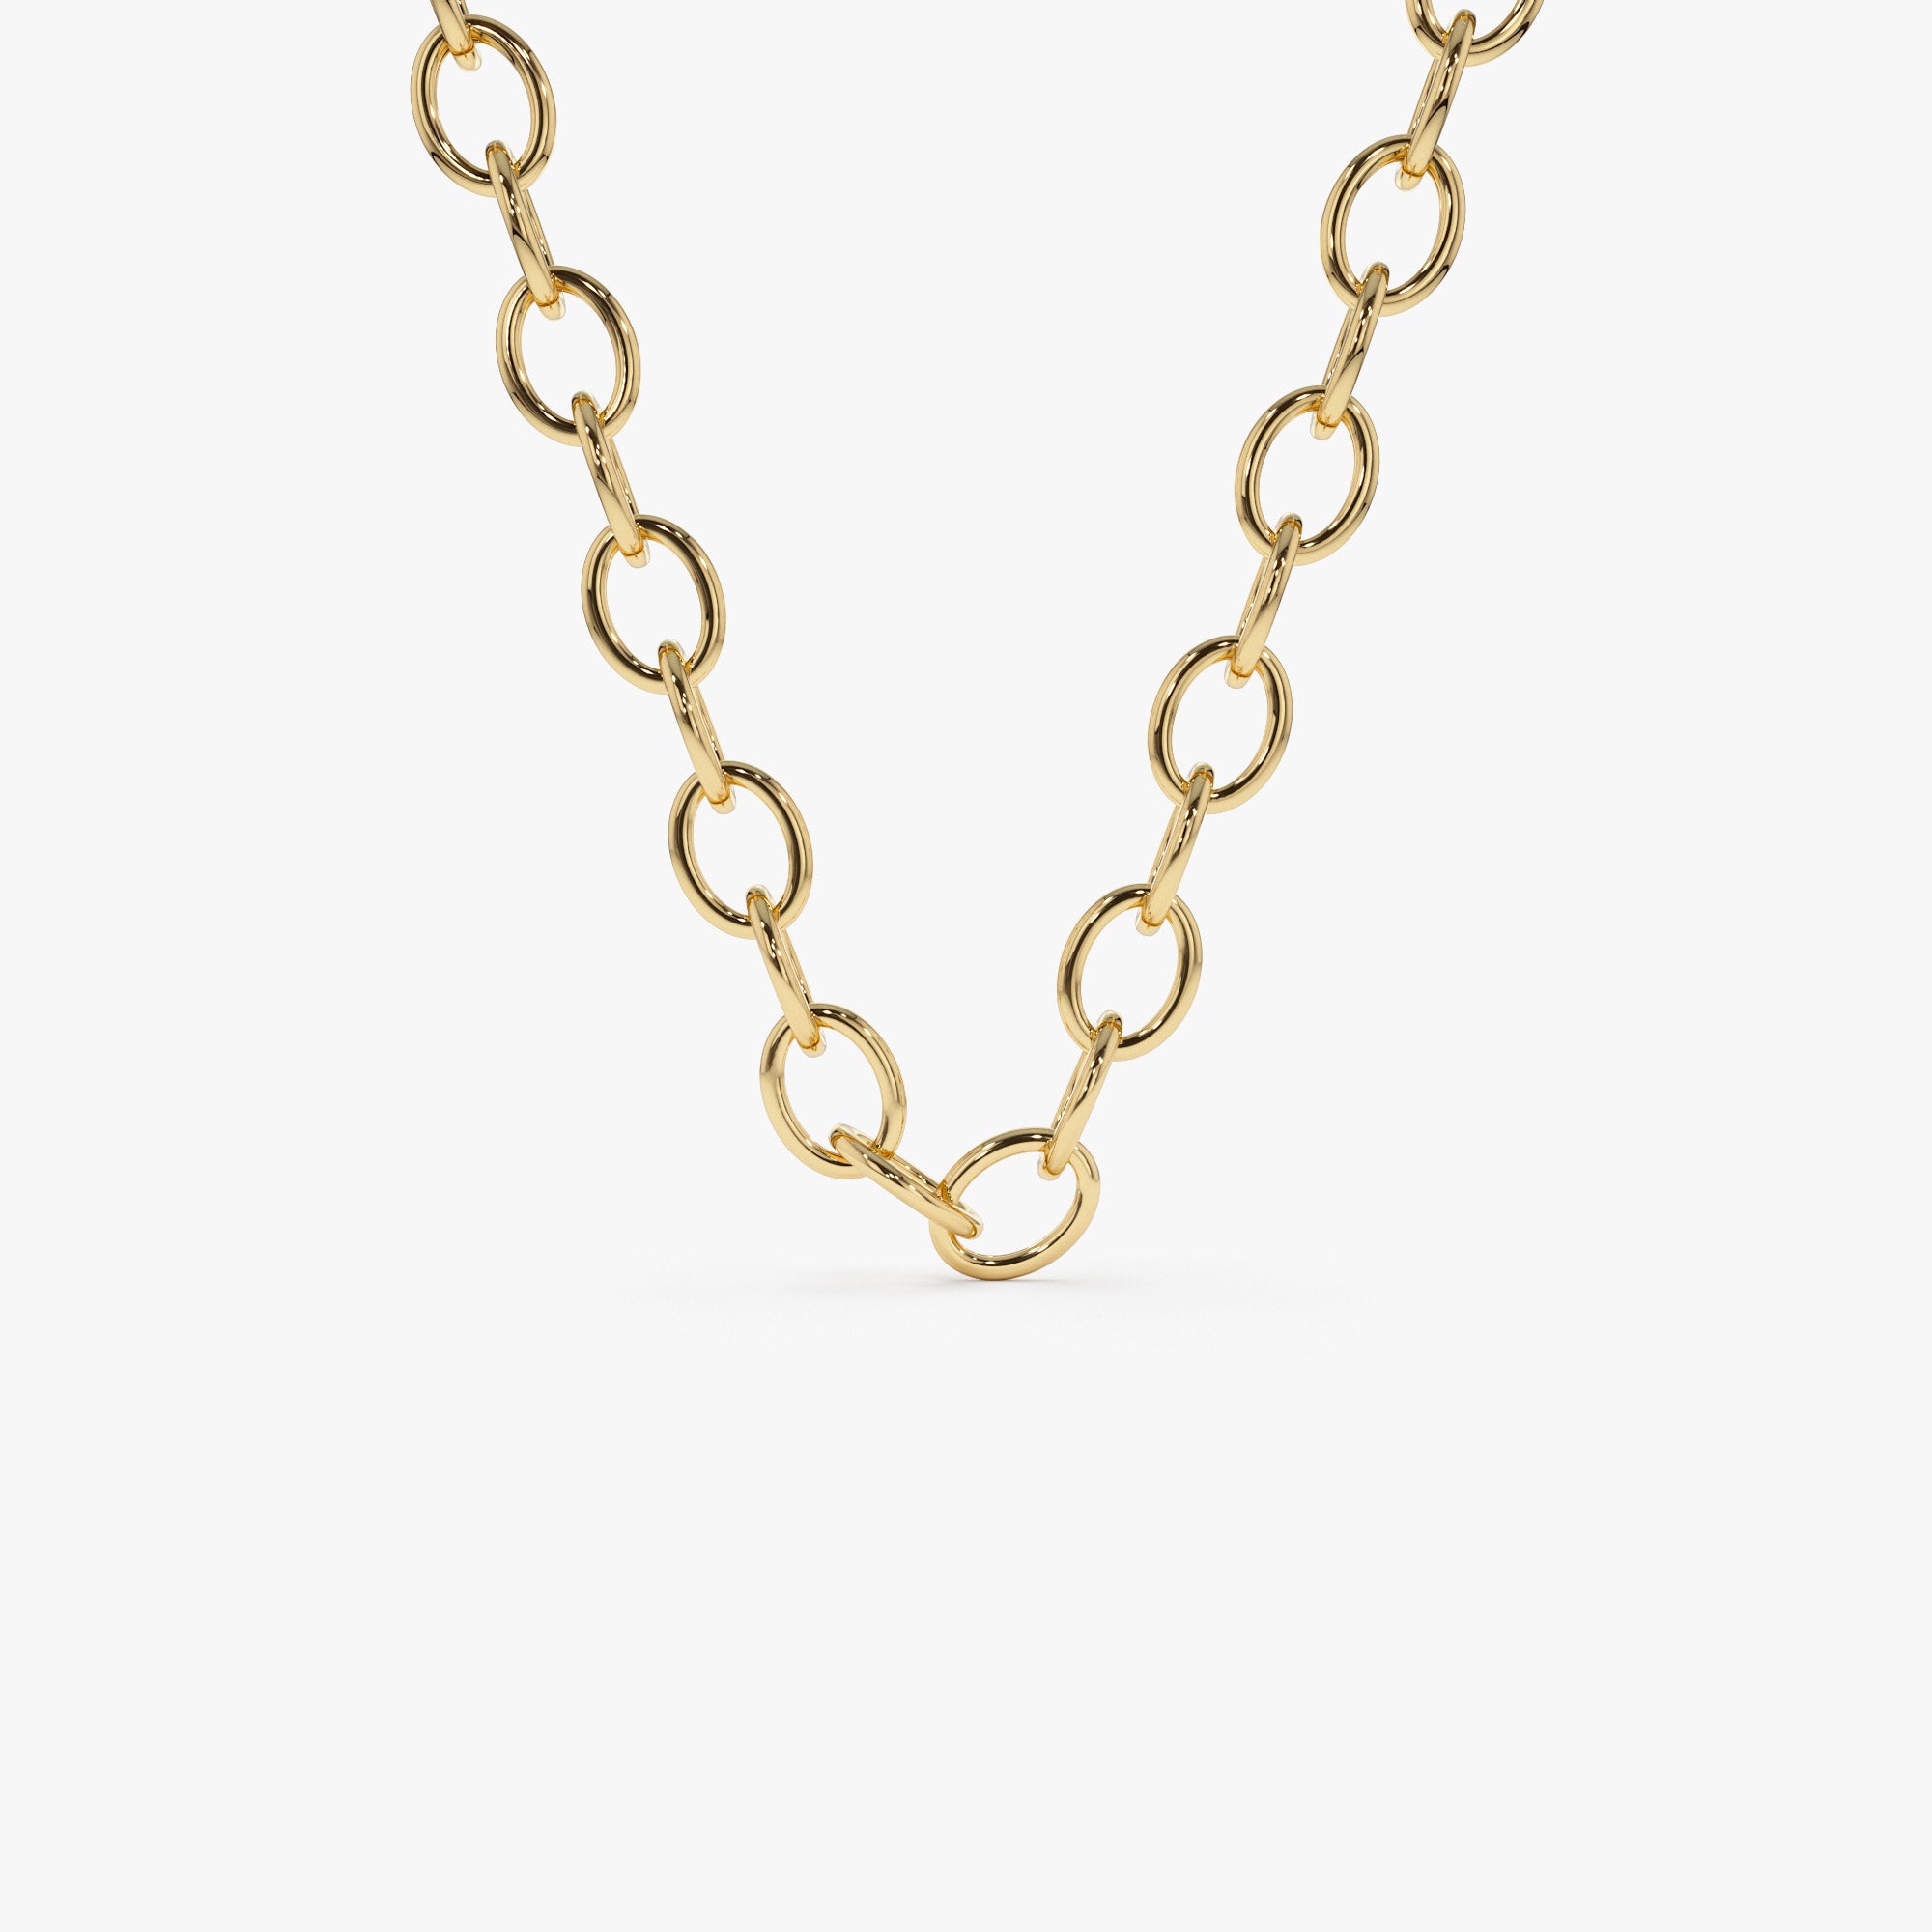 14k Oval Link Cable Chain Necklace  Ferkos Fine Jewelry